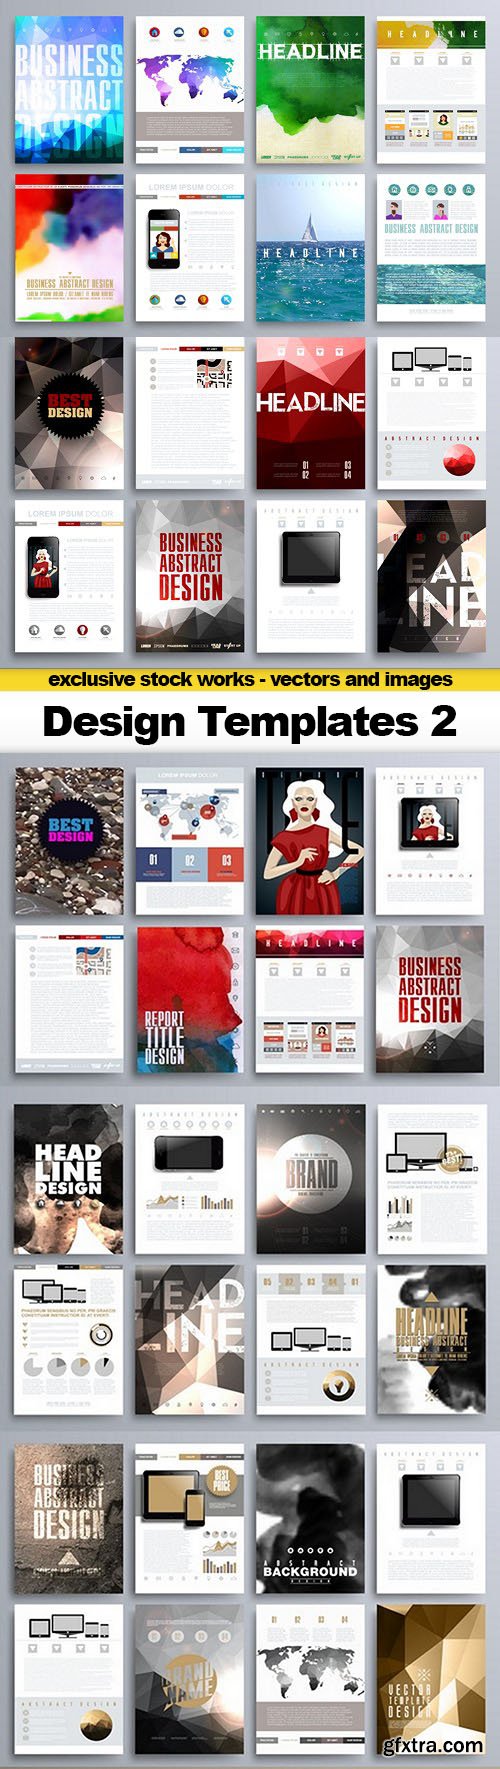 Set of Design Templates for Brochures, Flyers 2 - 10xEPS